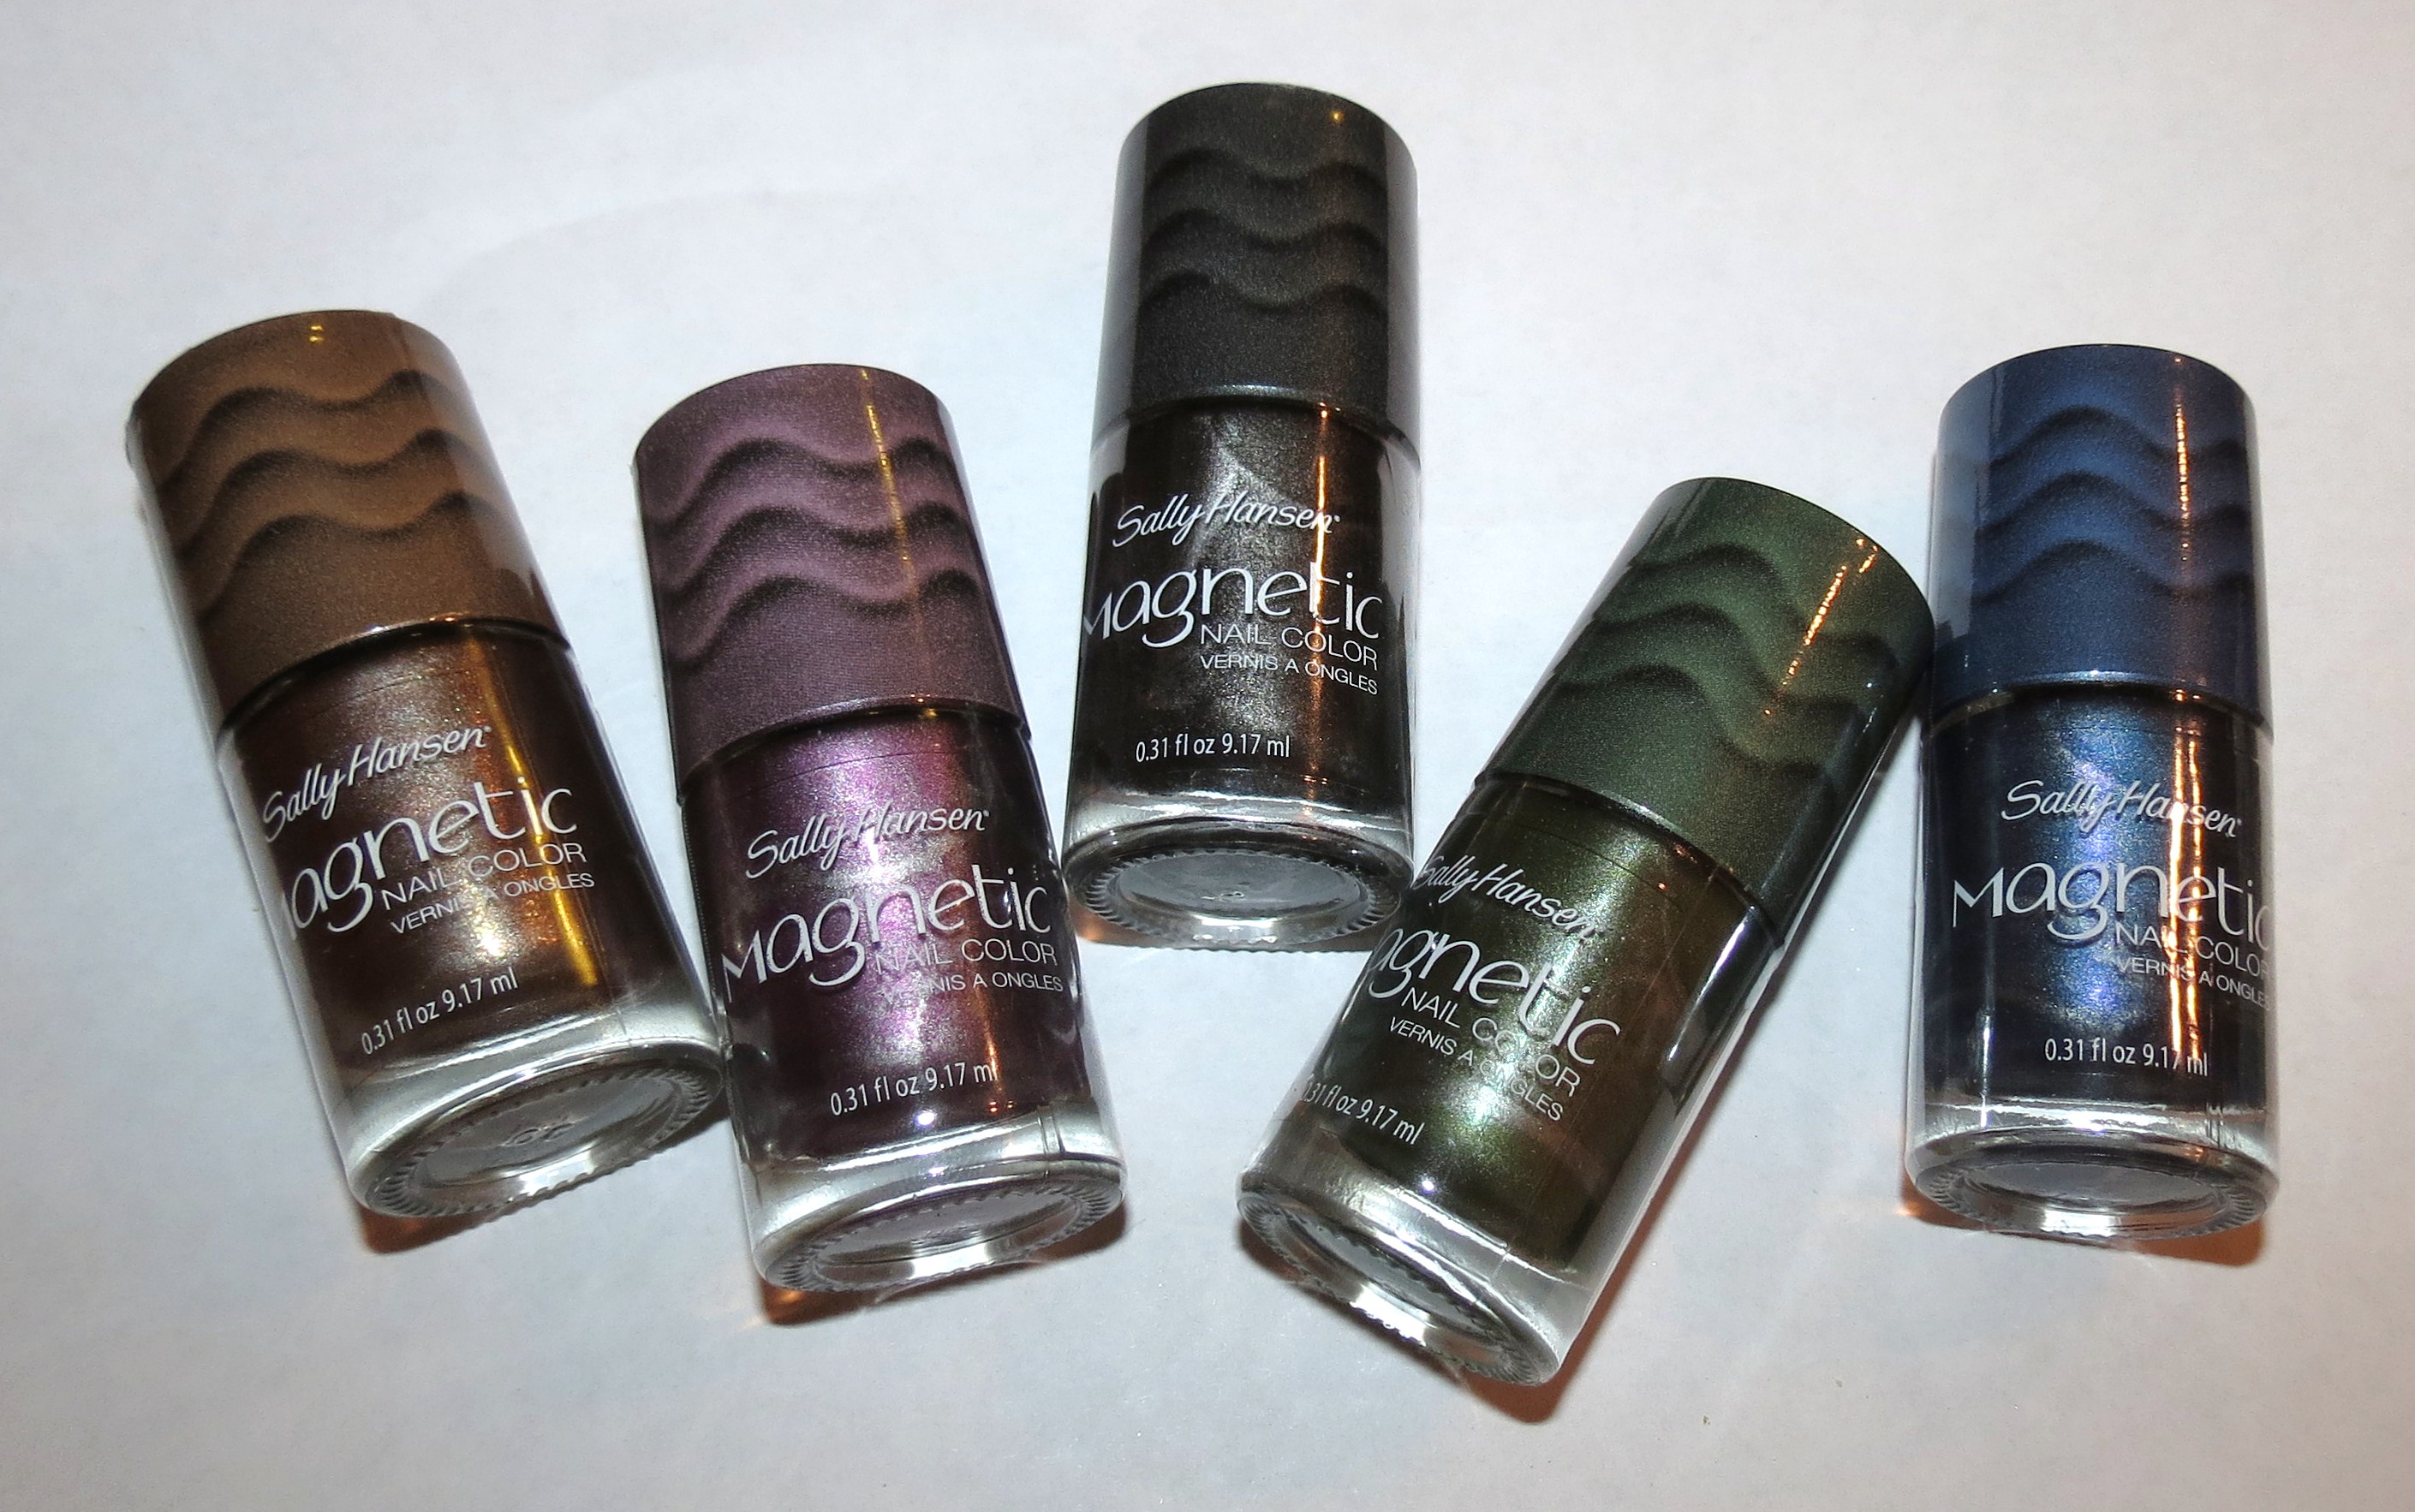 Sally Hansen Magnetic Nail Color Swatches and Review - Blushing Noir